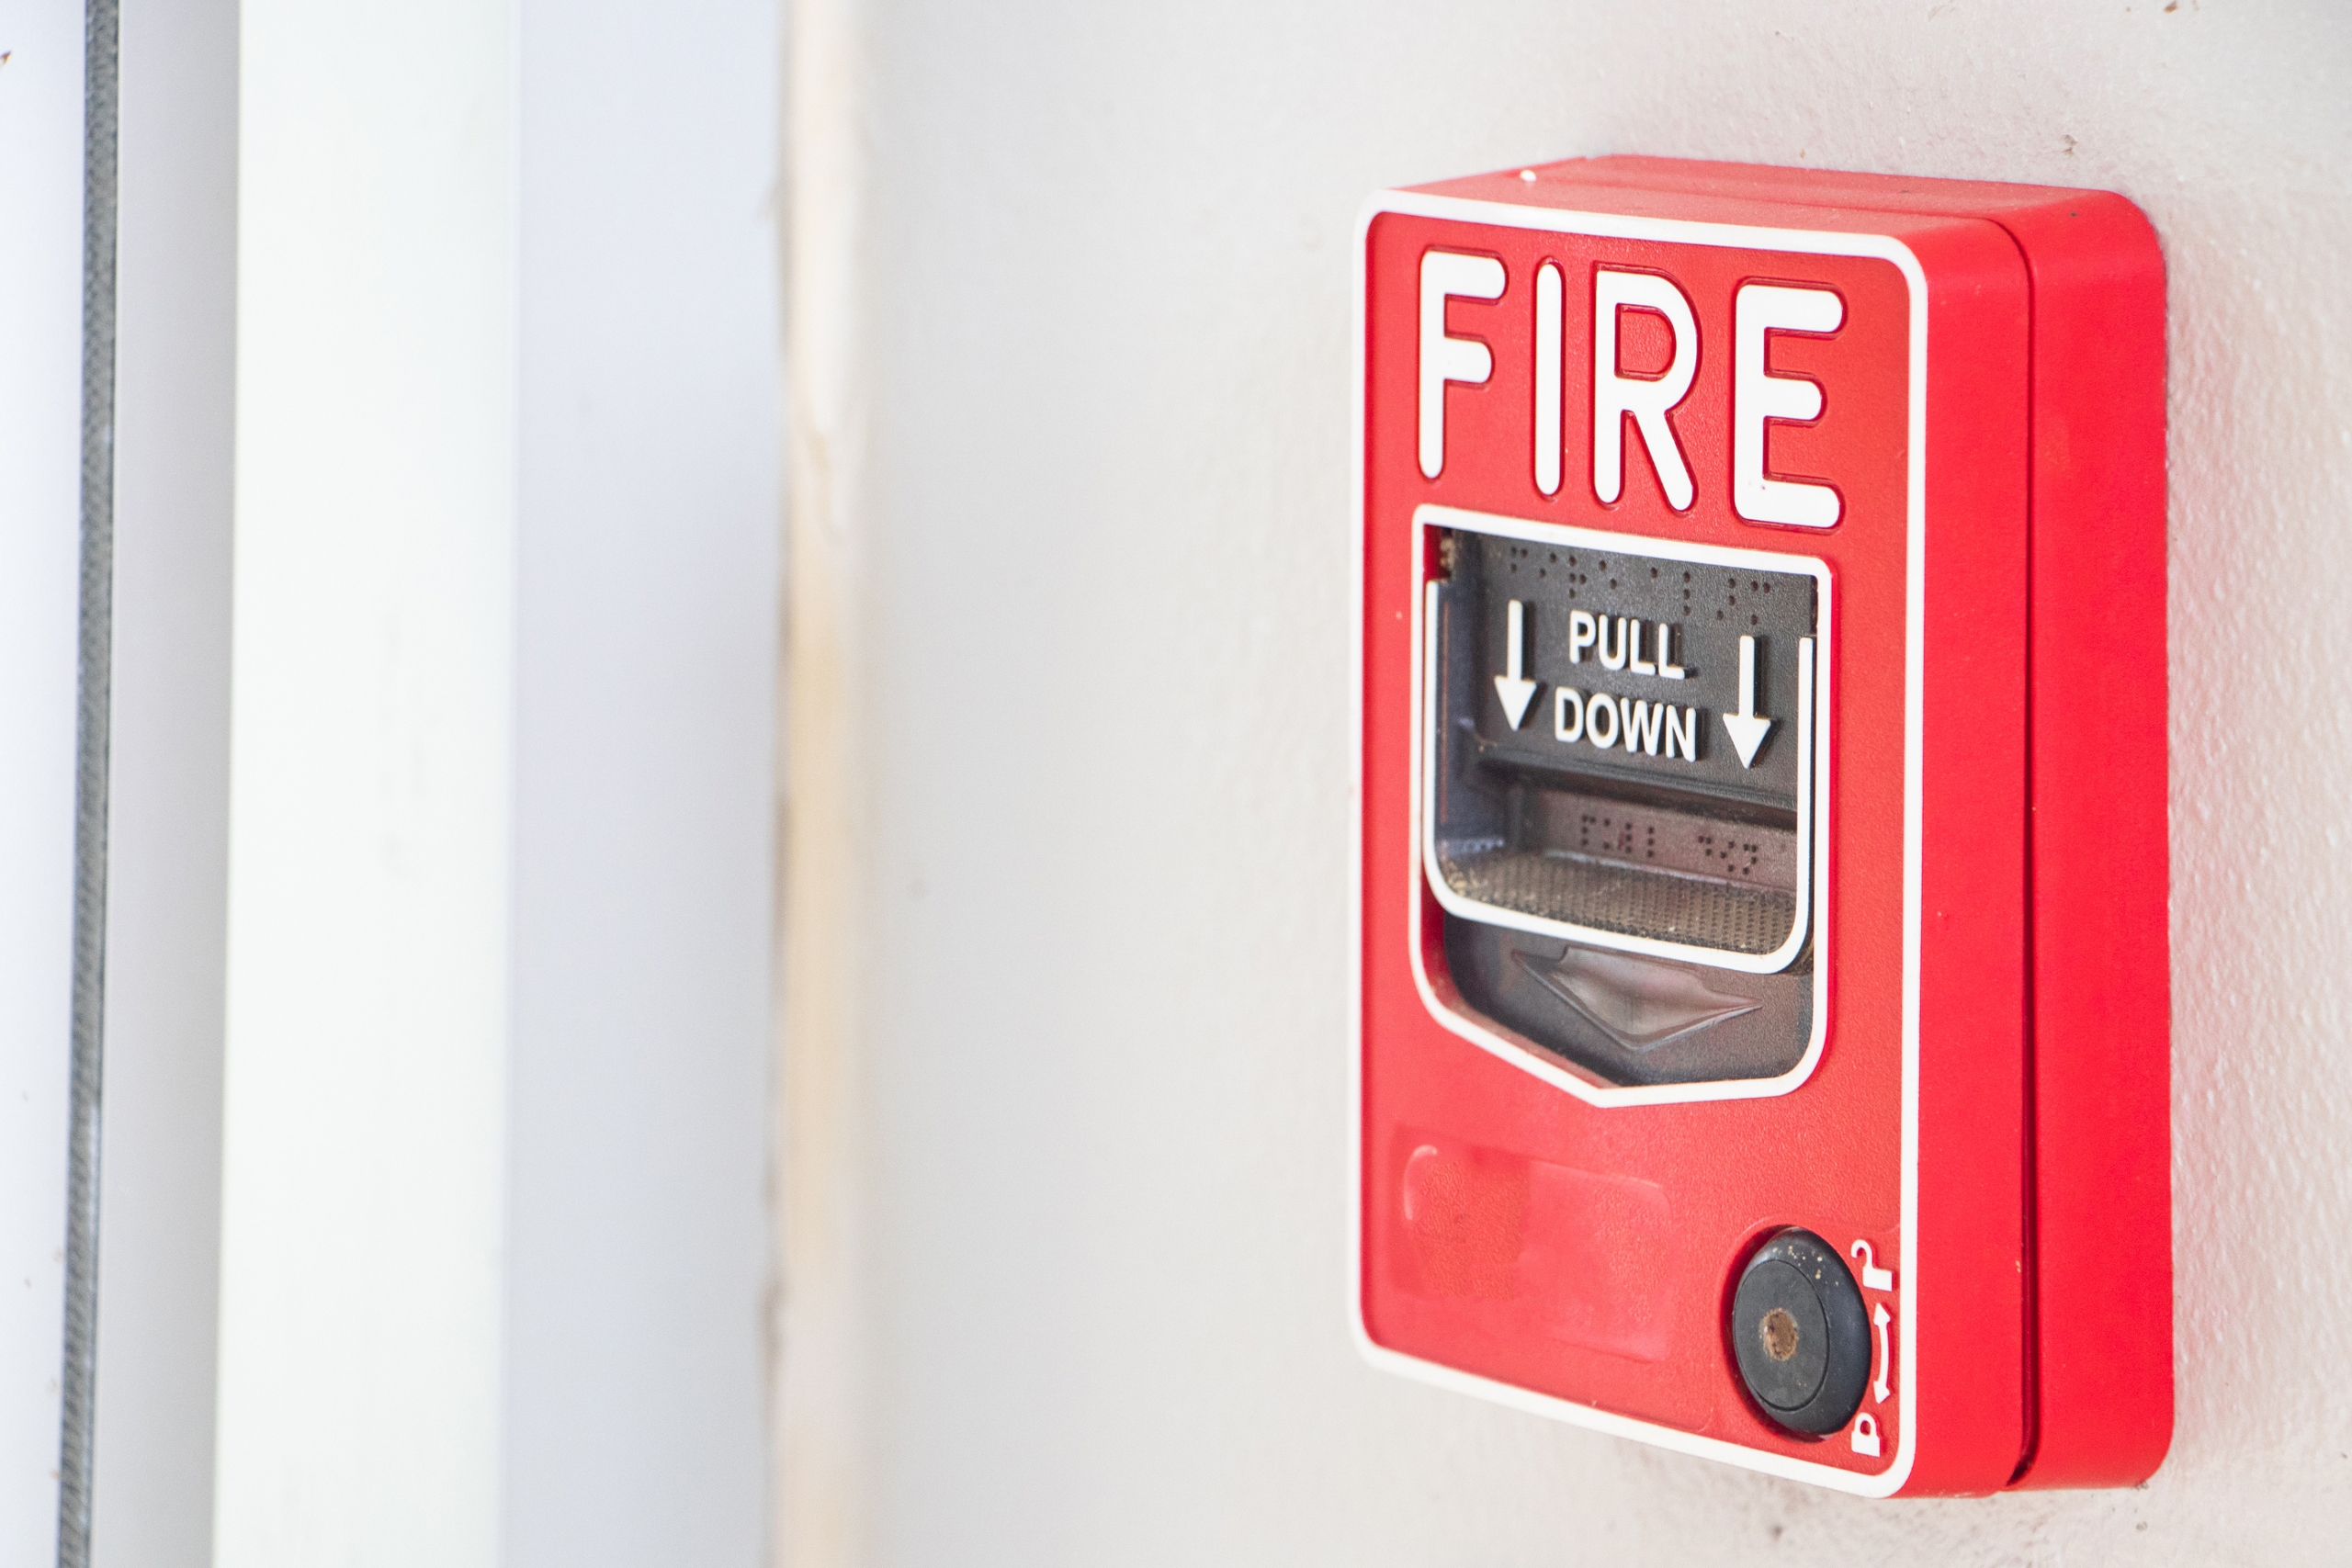 How Fire Detection Systems and Alarms Work | 𝗕𝗼𝘆𝗱 &amp; 𝗔𝘀𝘀𝗼𝗰𝗶𝗮𝘁𝗲𝘀